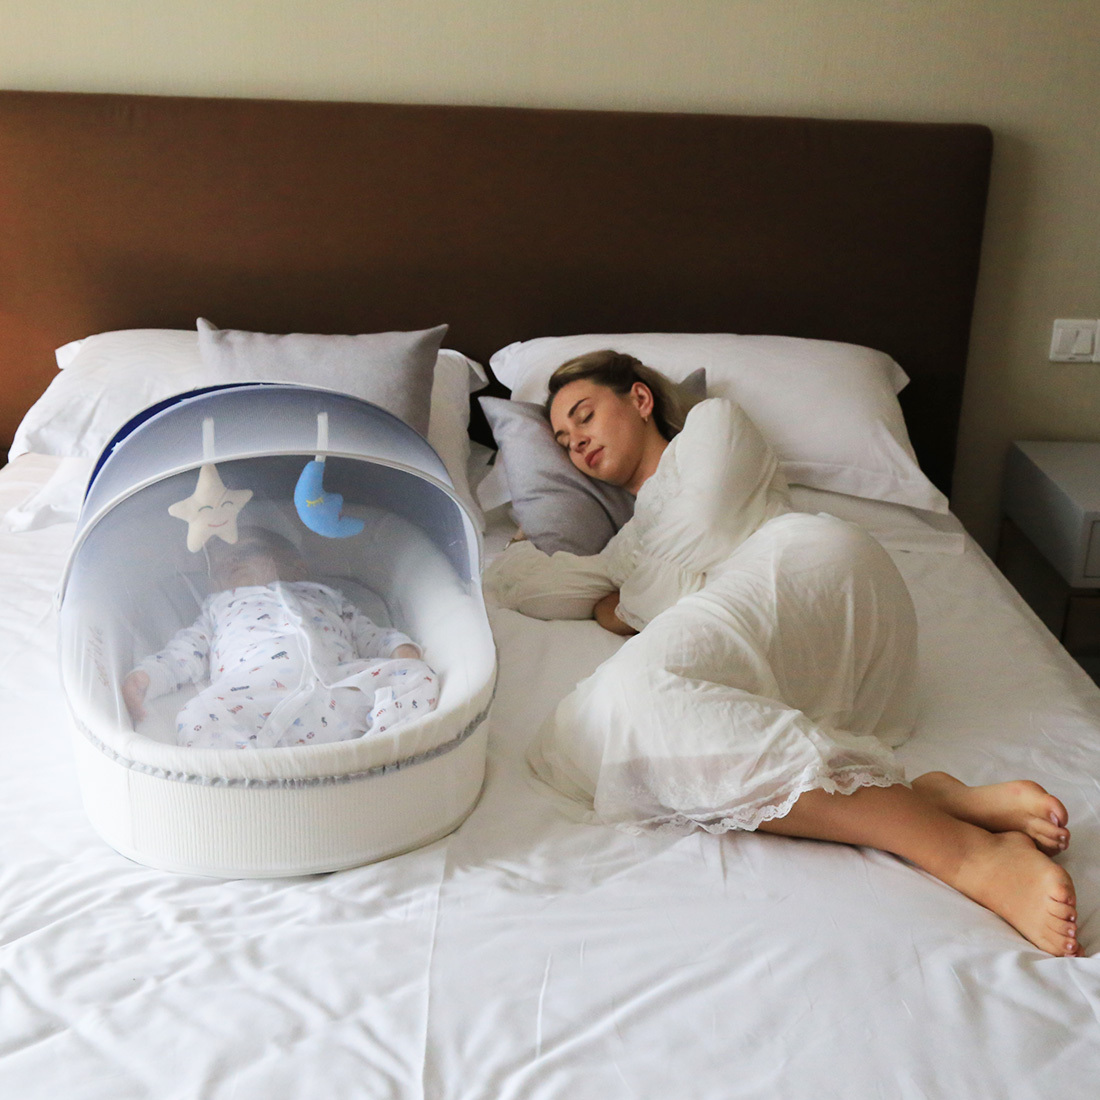 portable baby bed with mosquito net